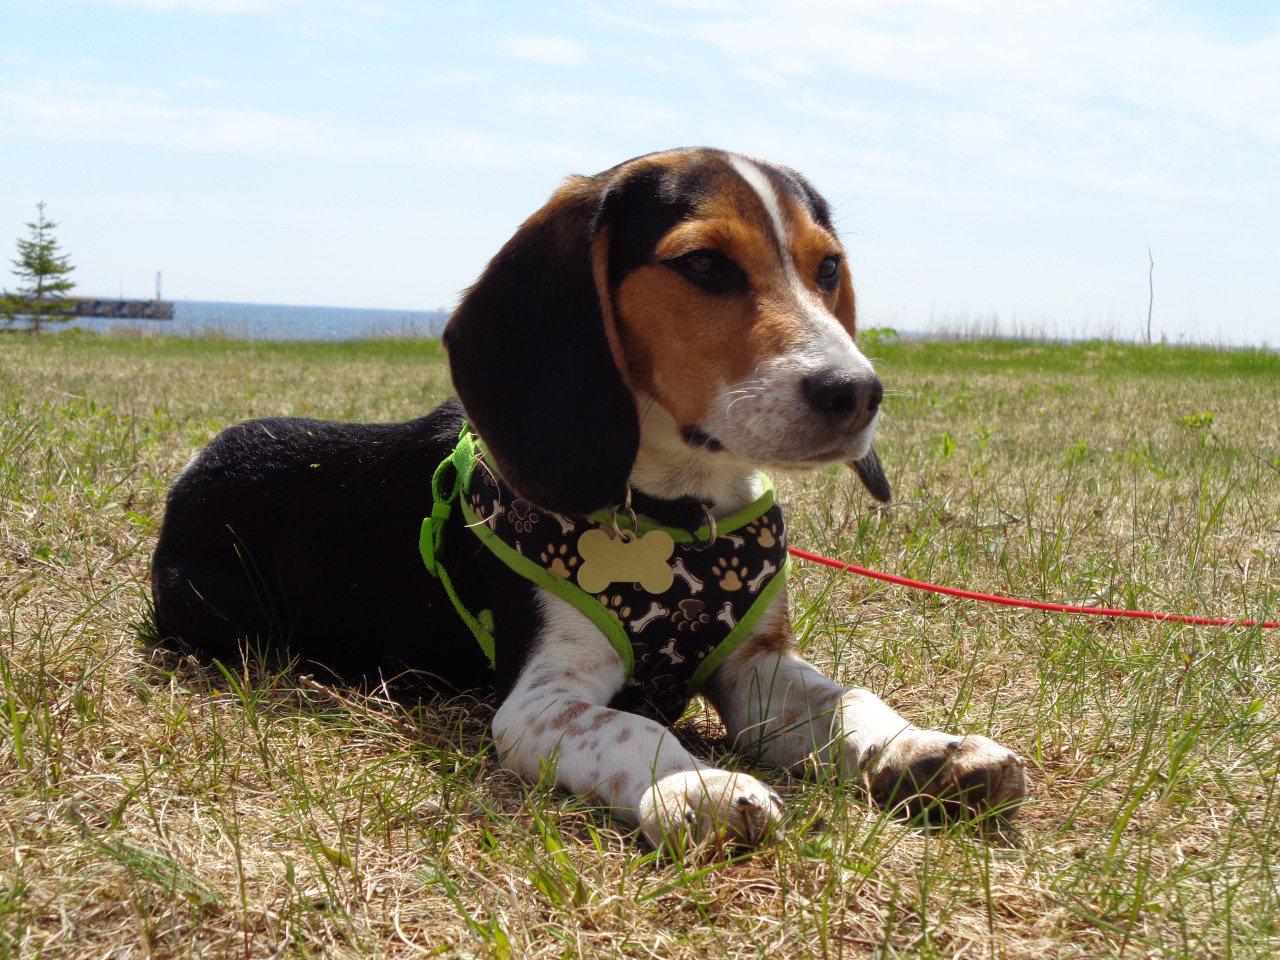 Who is considered the most famous beagle of all time?